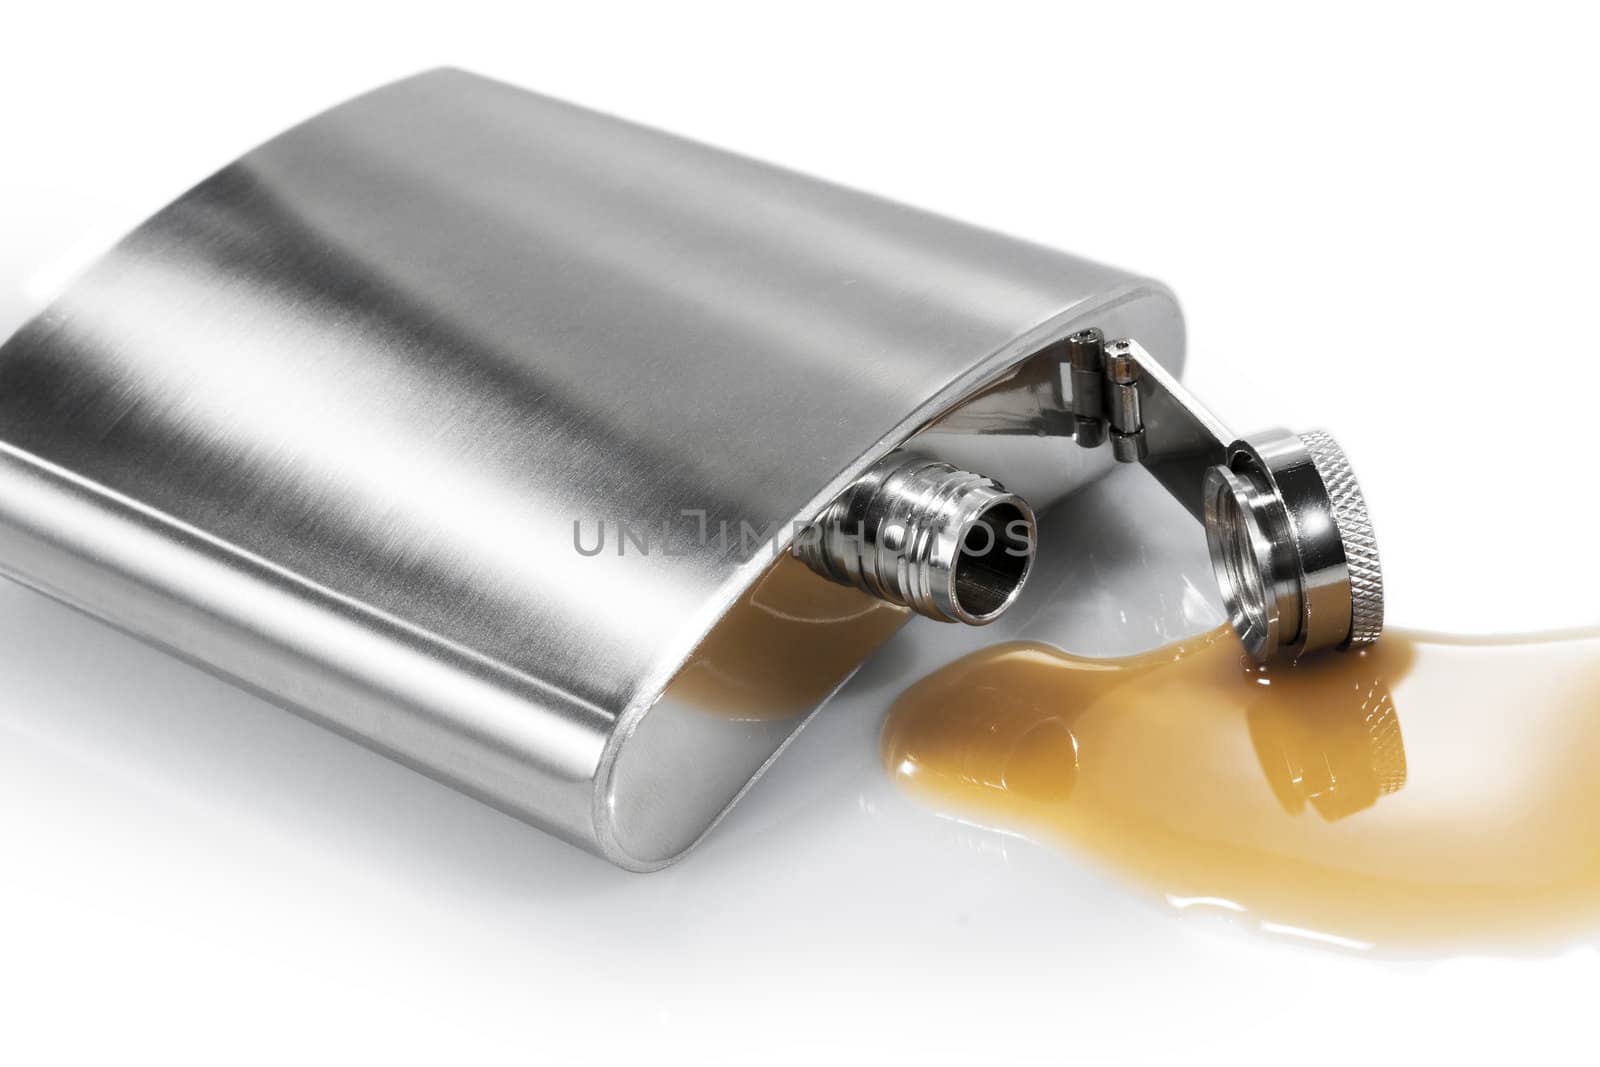 Flask and spilled alcohol on the white background. Isolated.